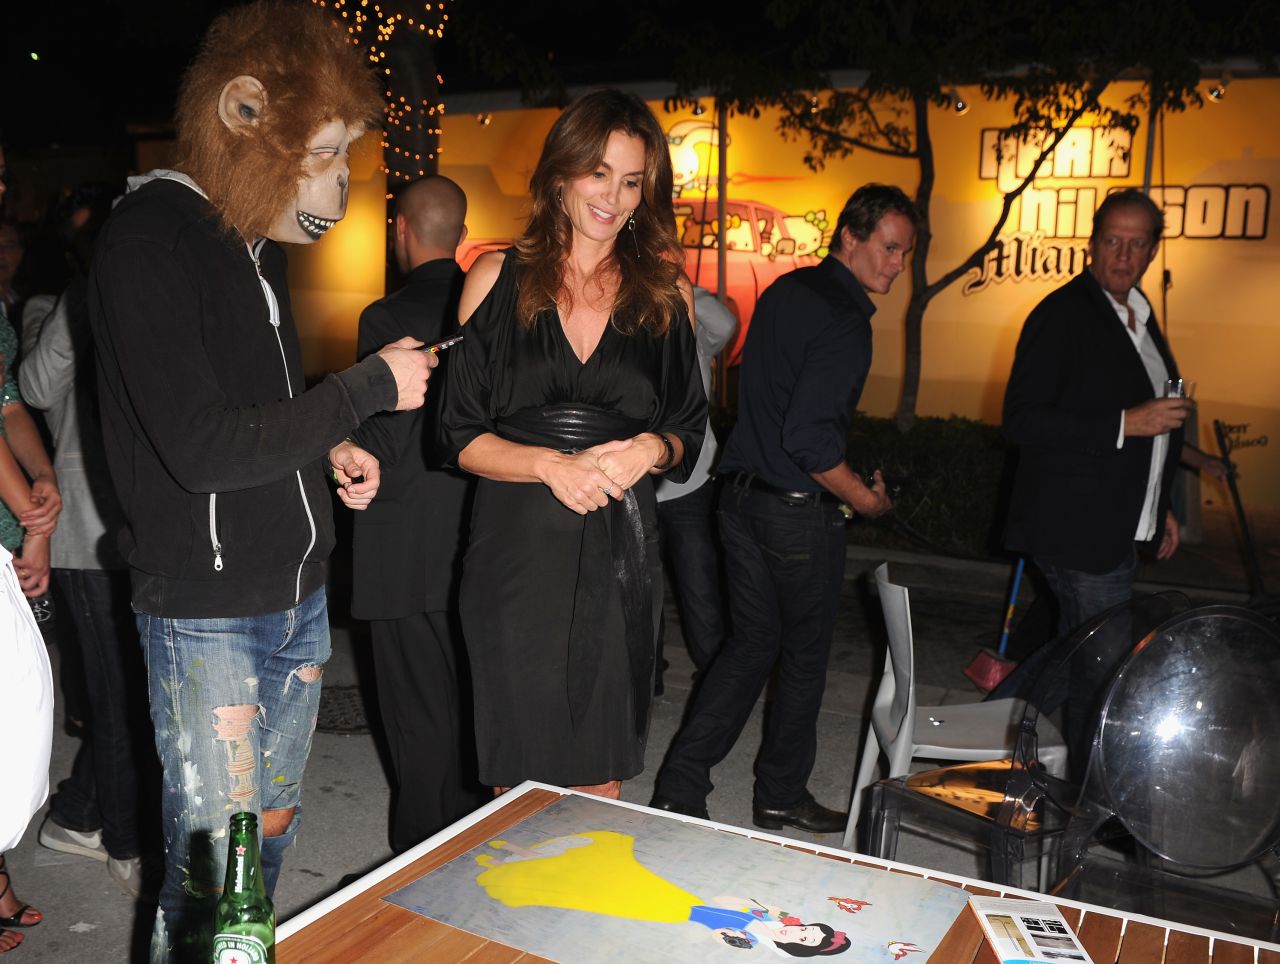 Cindy Crawford, 47, attended a photographic retrospective of her career during Art Basel Miami Beach. Here, she chats with anonymous Swedish artist Herr Nilsson about one of his paintings, which depicts Snow White.